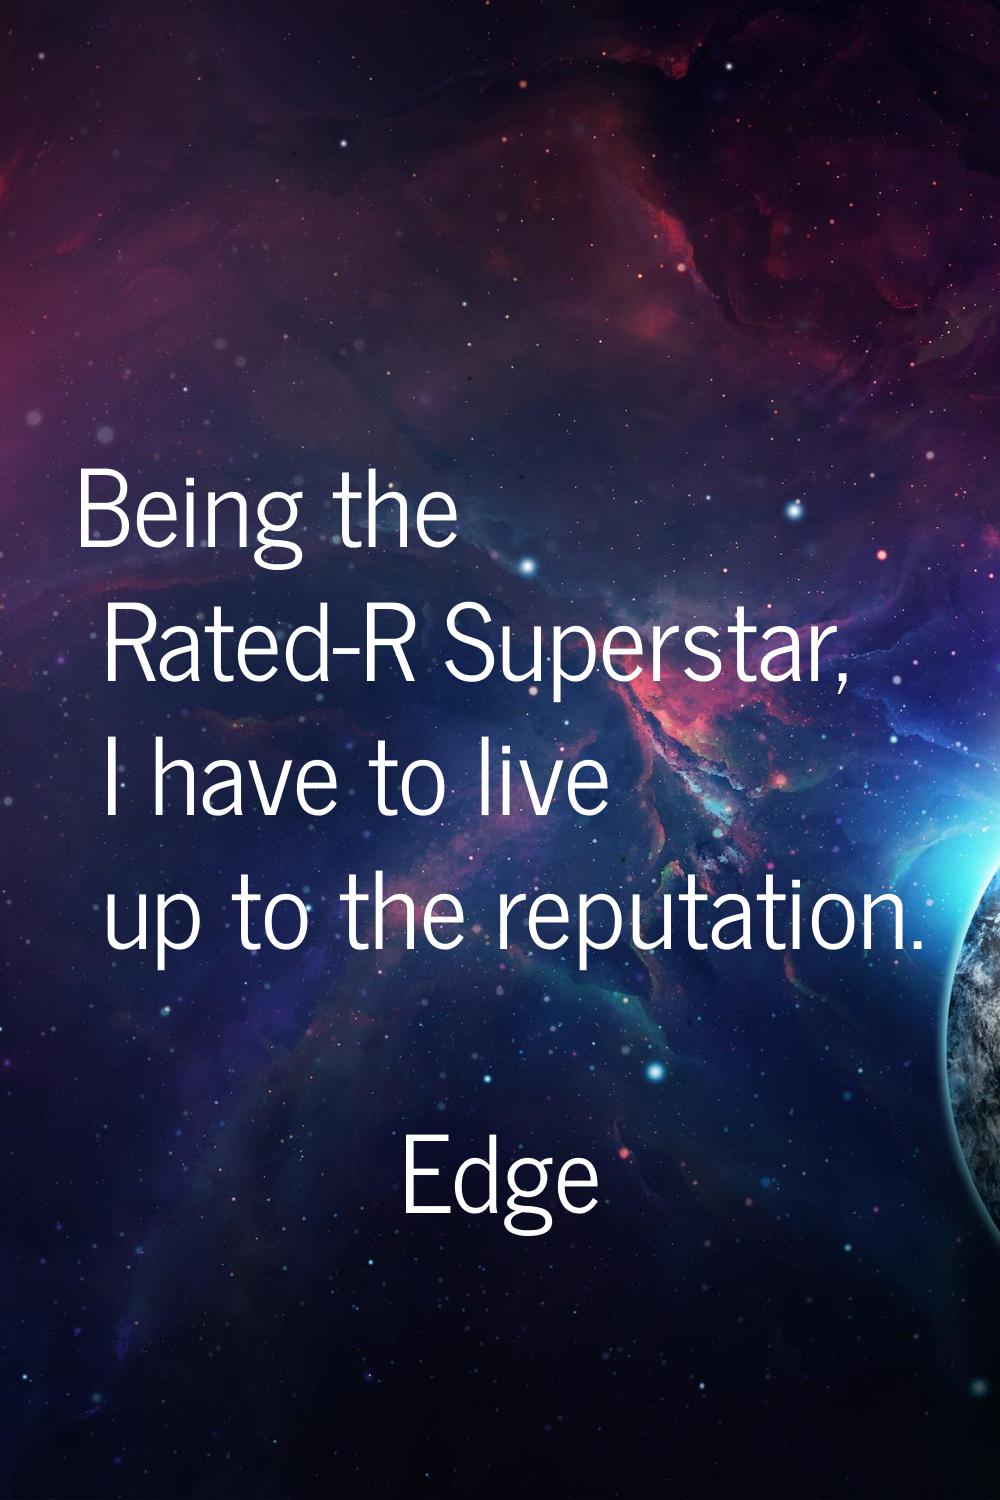 Being the Rated-R Superstar, I have to live up to the reputation.